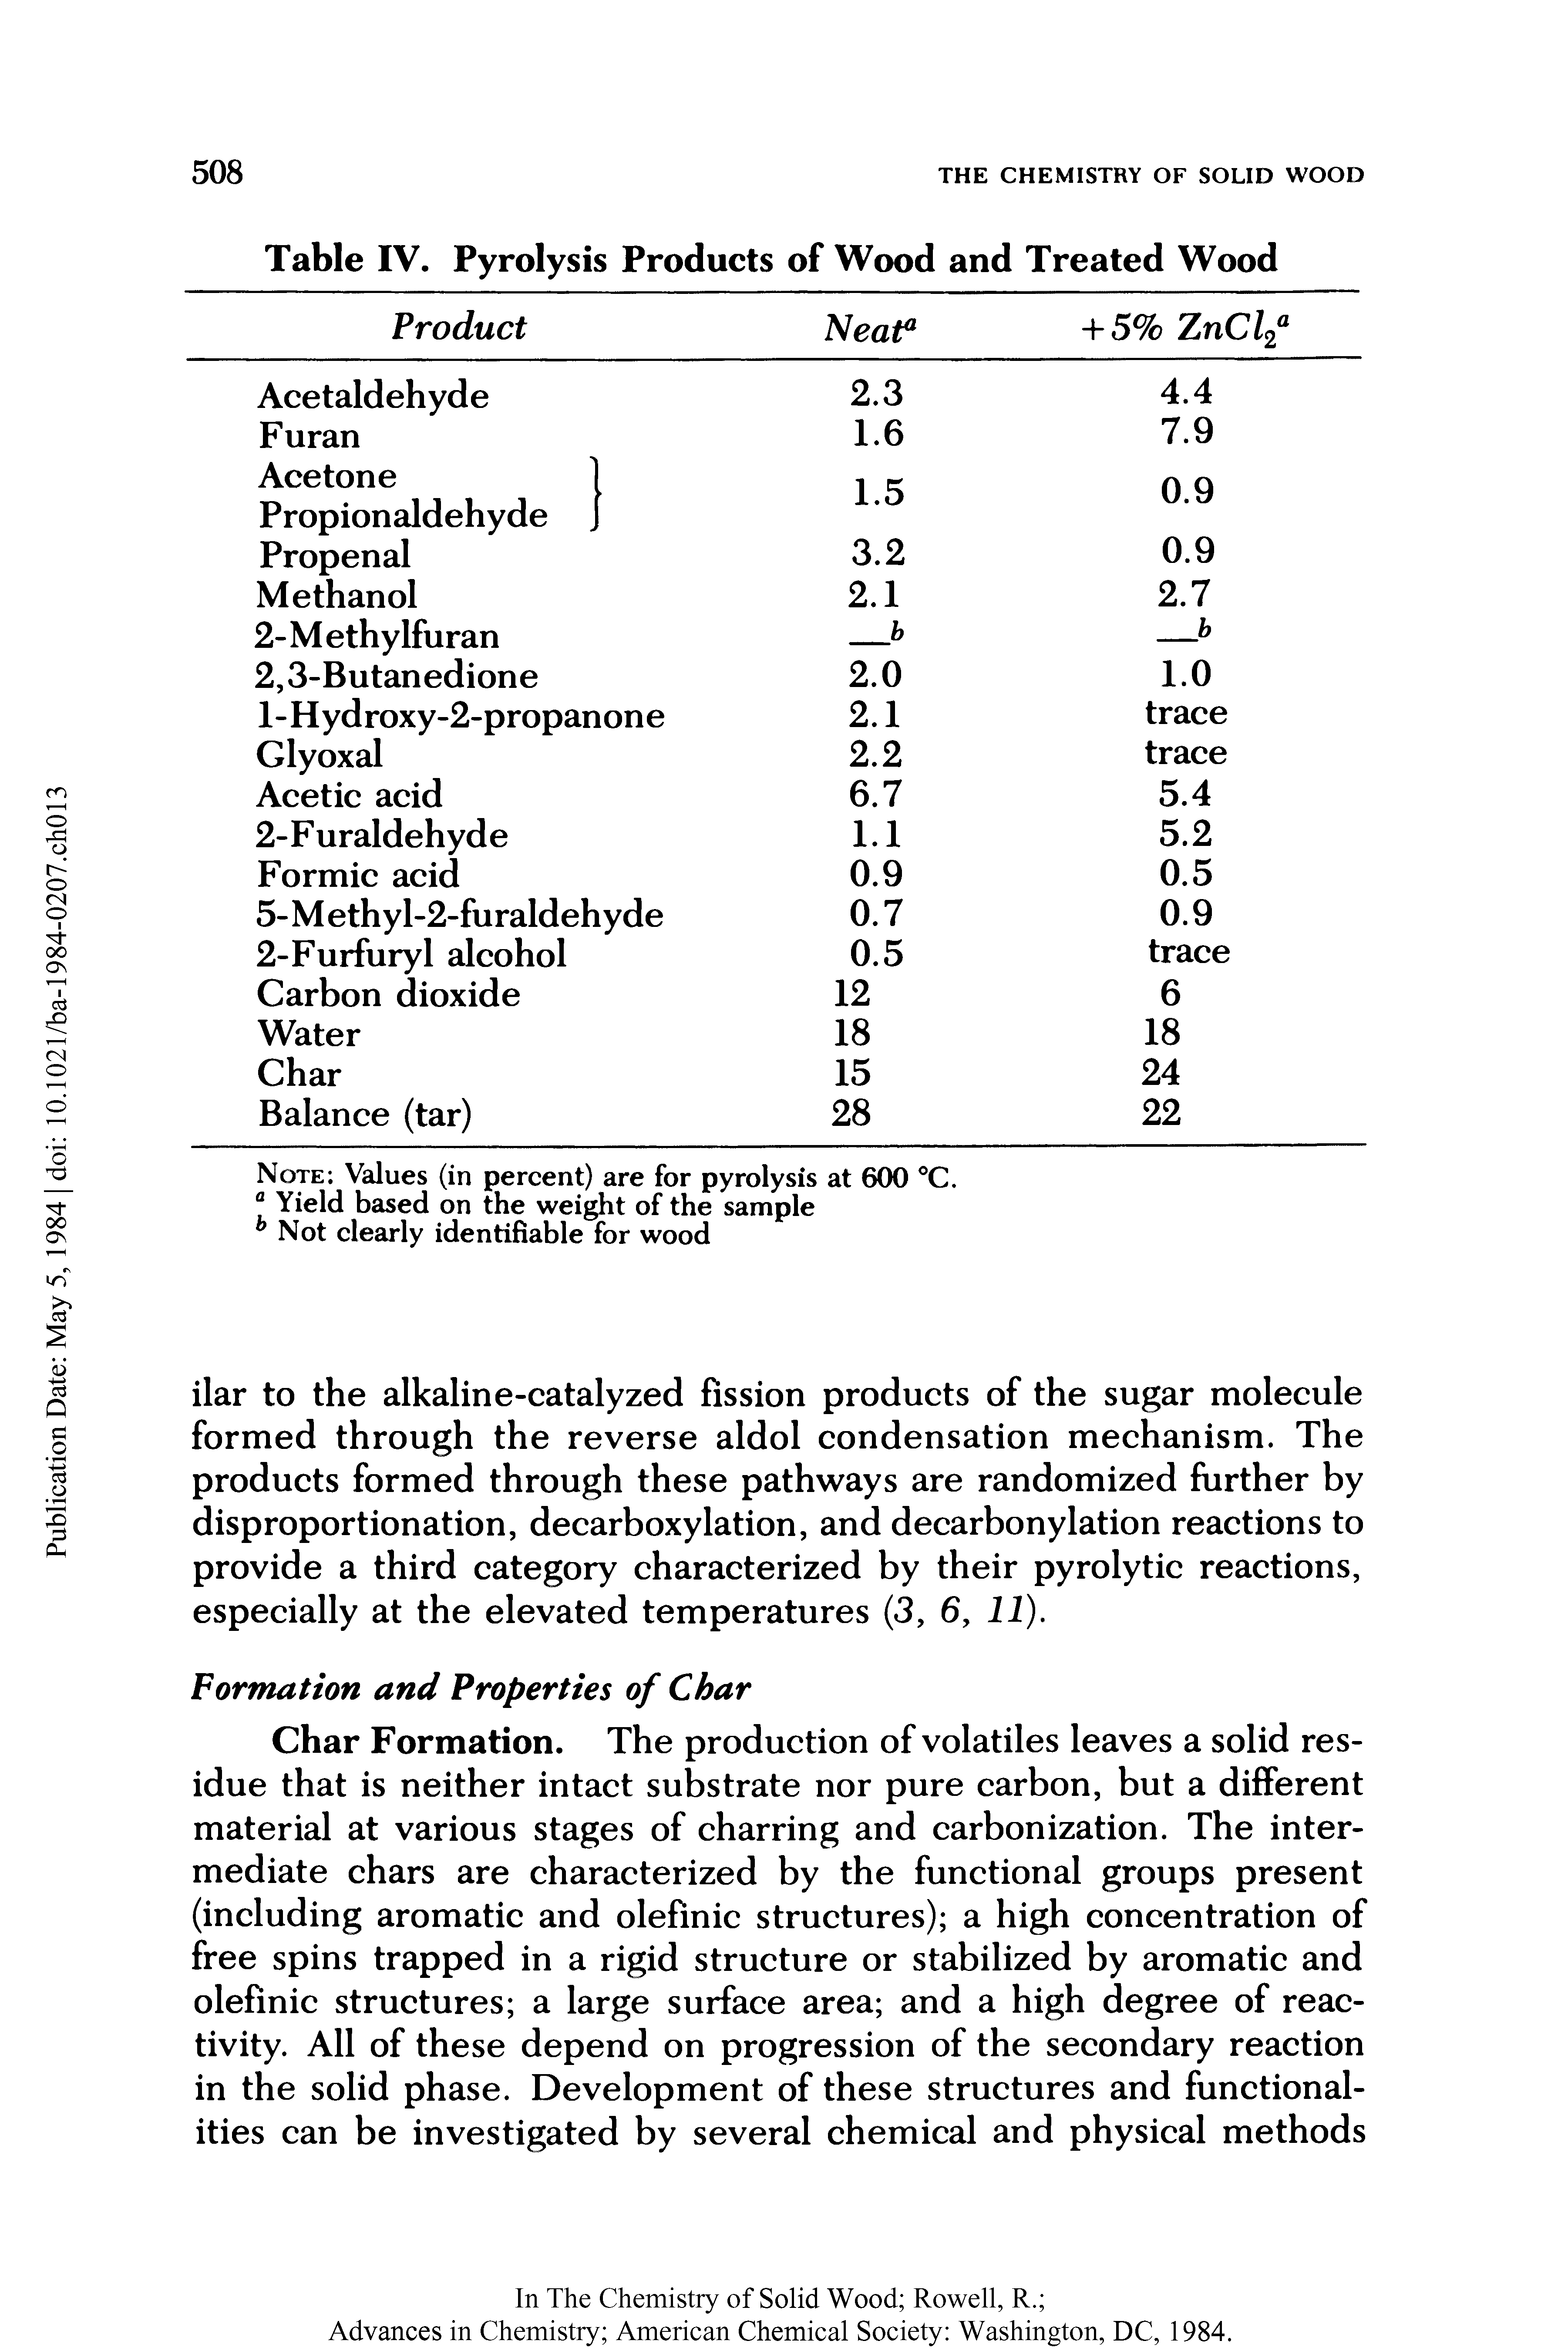 Table IV. Pyrolysis Products of Wood and Treated Wood...